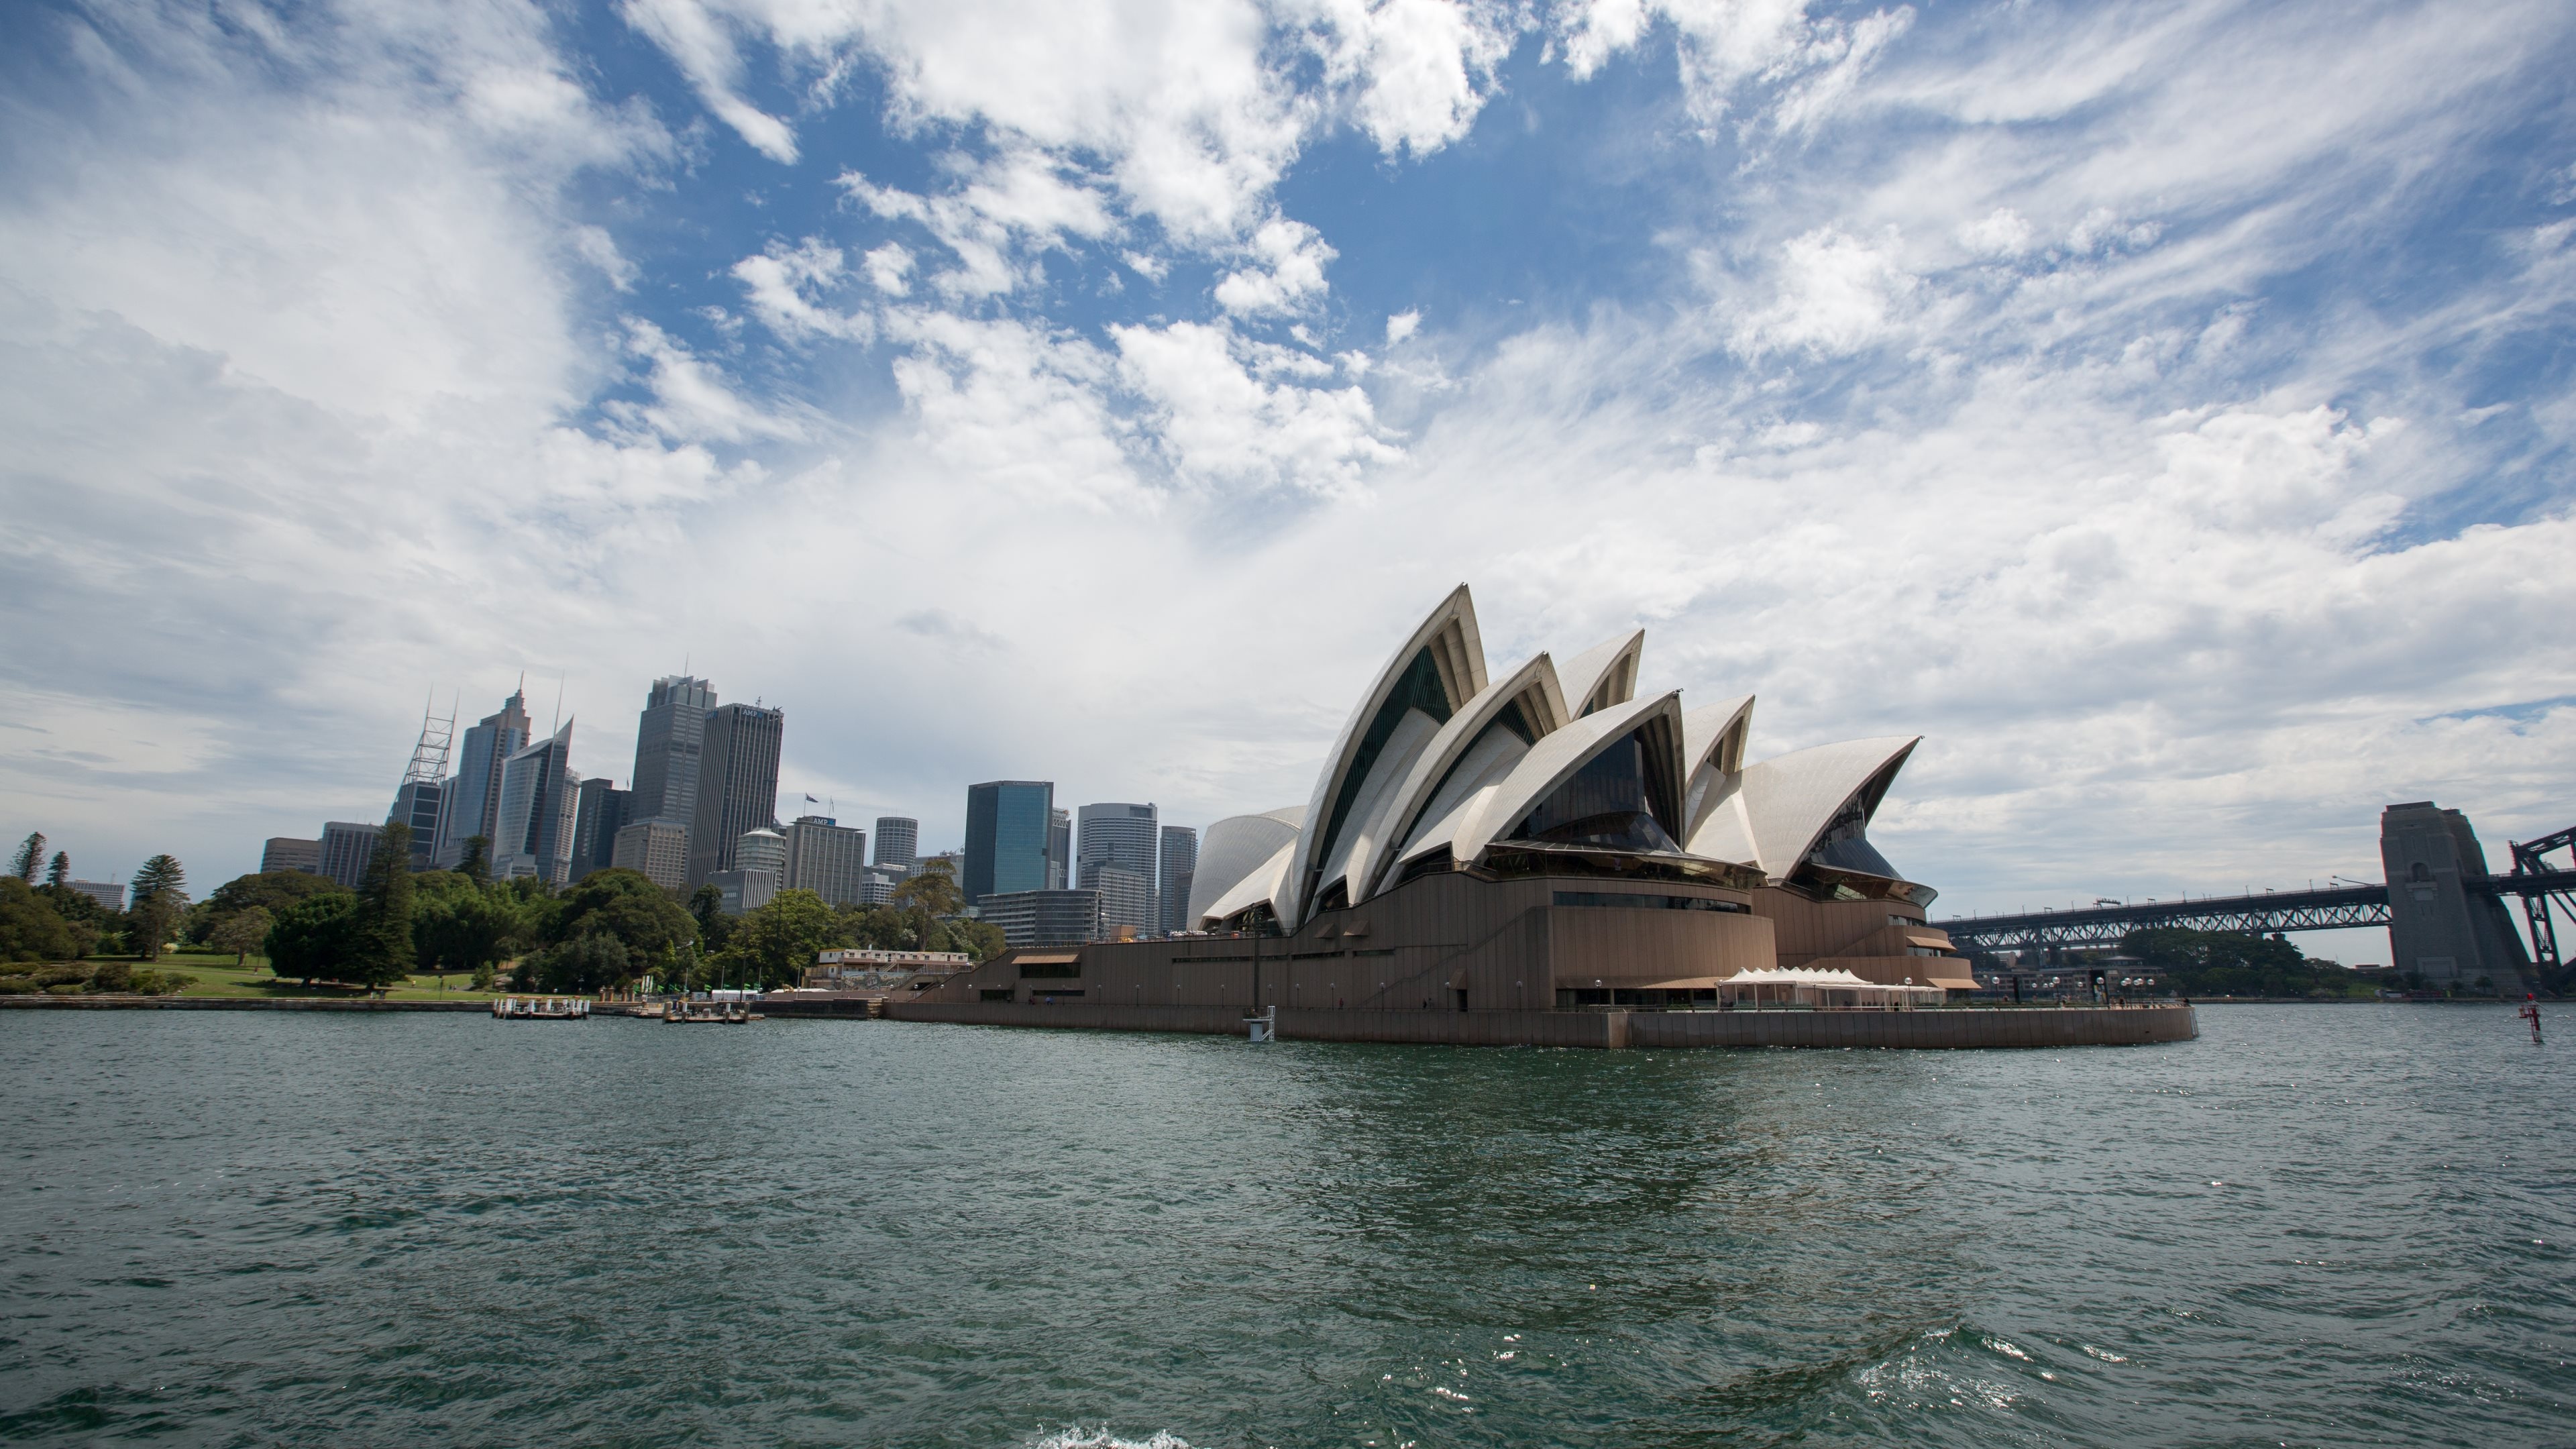 Sydney: Opera House was opened on October 20th, 1973, Architecture. 3840x2160 4K Wallpaper.